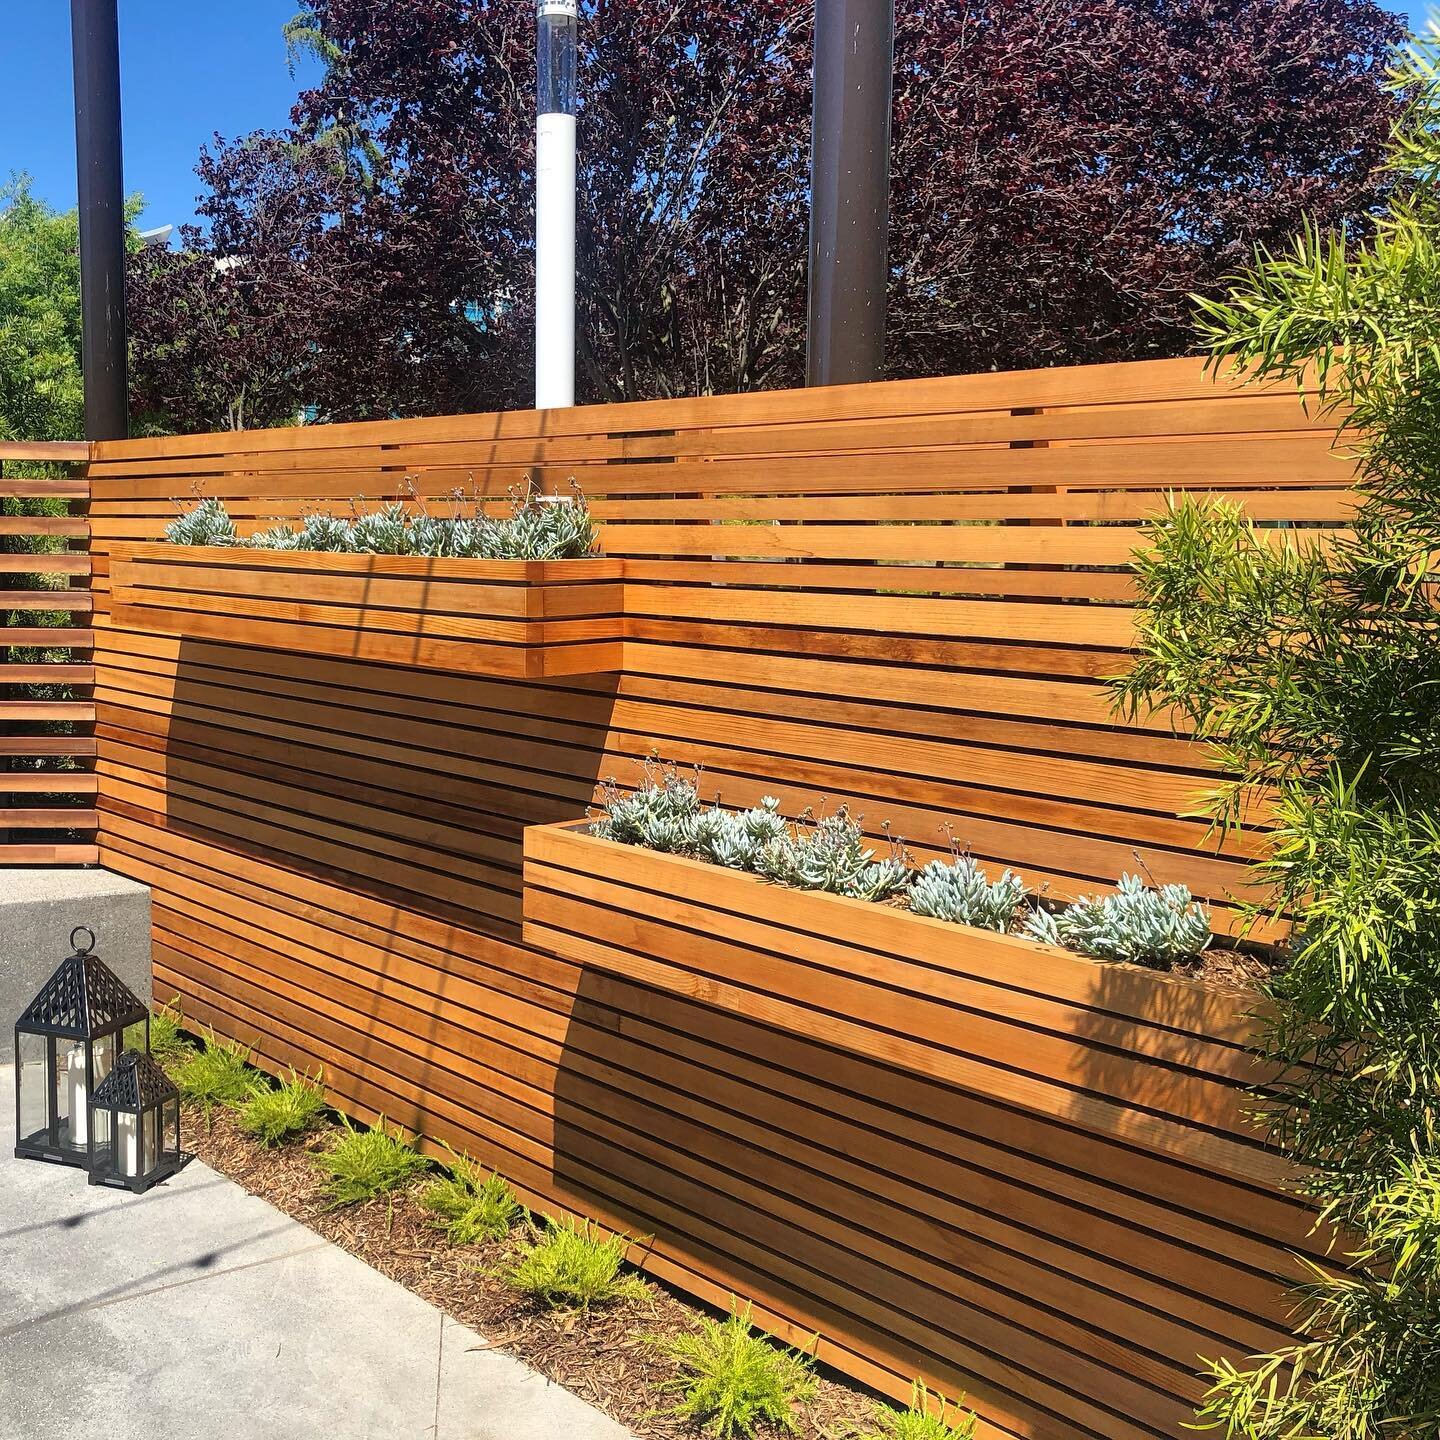 Newly completed clear heart redwood fence and planters. 👌🏼 #ThinkOutsideDesign #landscapedesign #landscapearchitecture #fencedesign #gardendesign